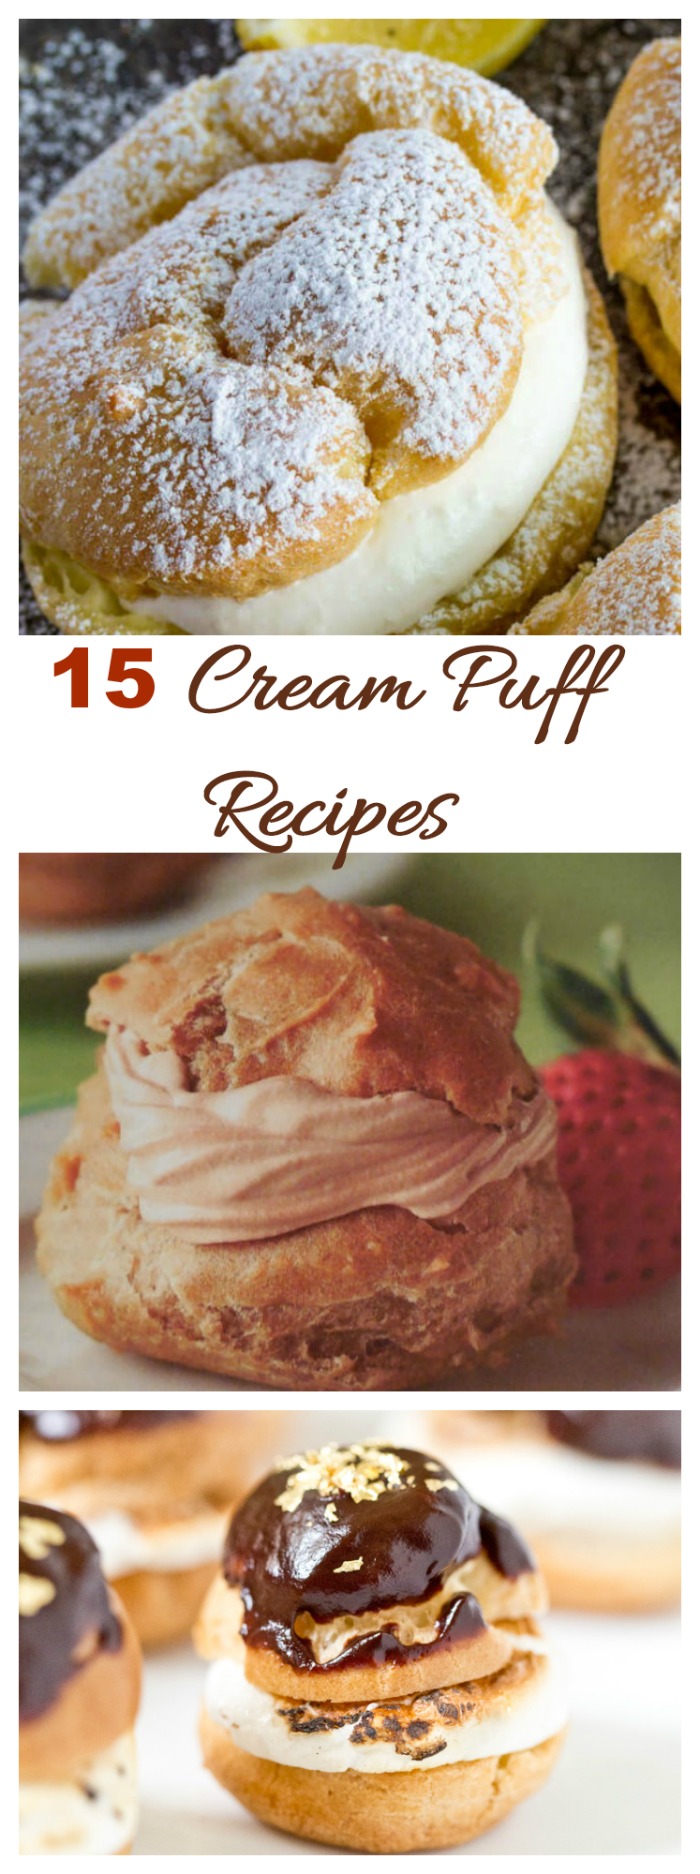 15 delicious cream puff recipes to tempt your sweet tooth #nationaldays #creampuffs